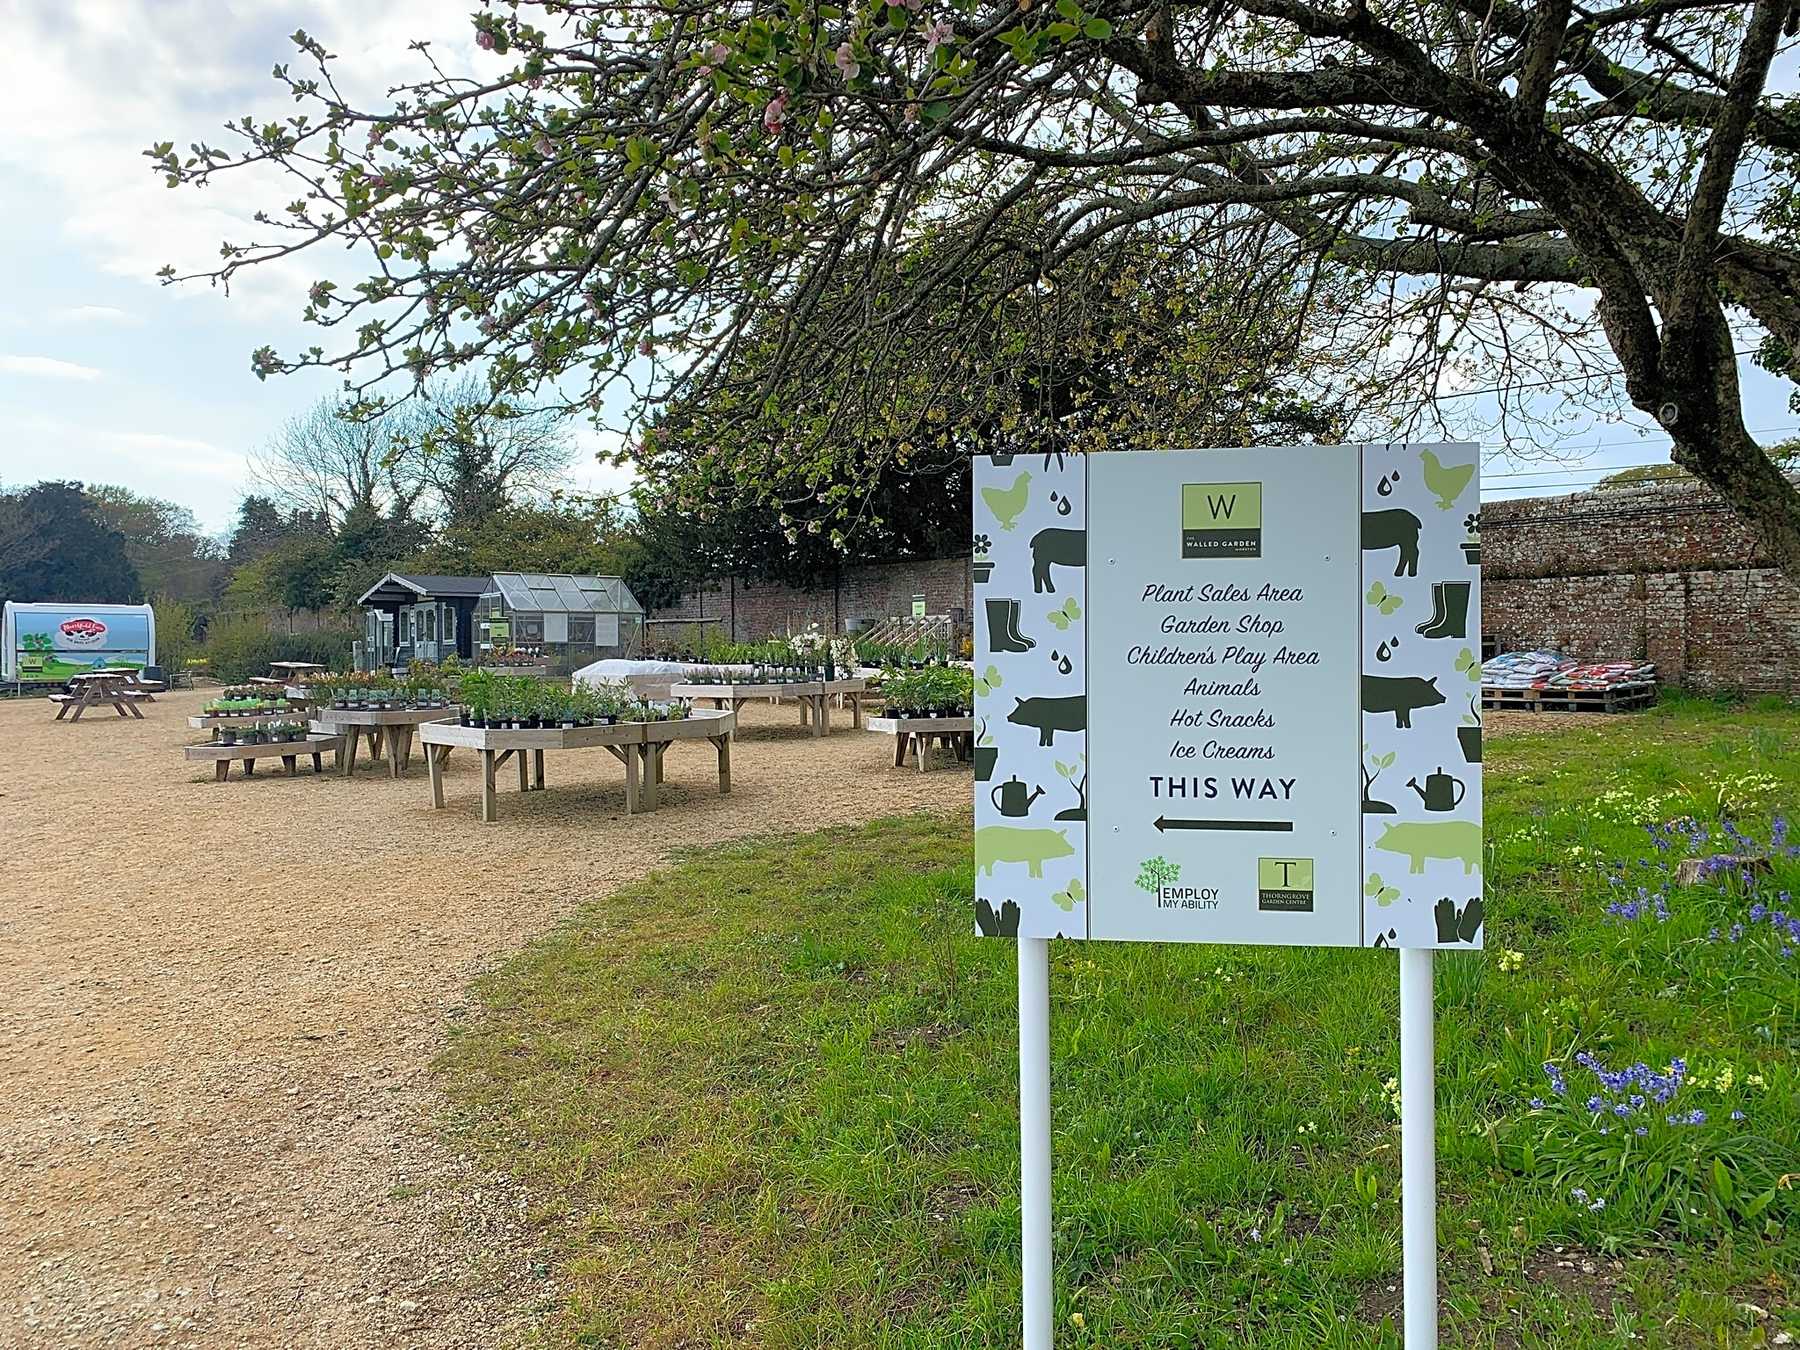 The Walled Garden Campsite Moreton Updated 2021 Prices Pitchup